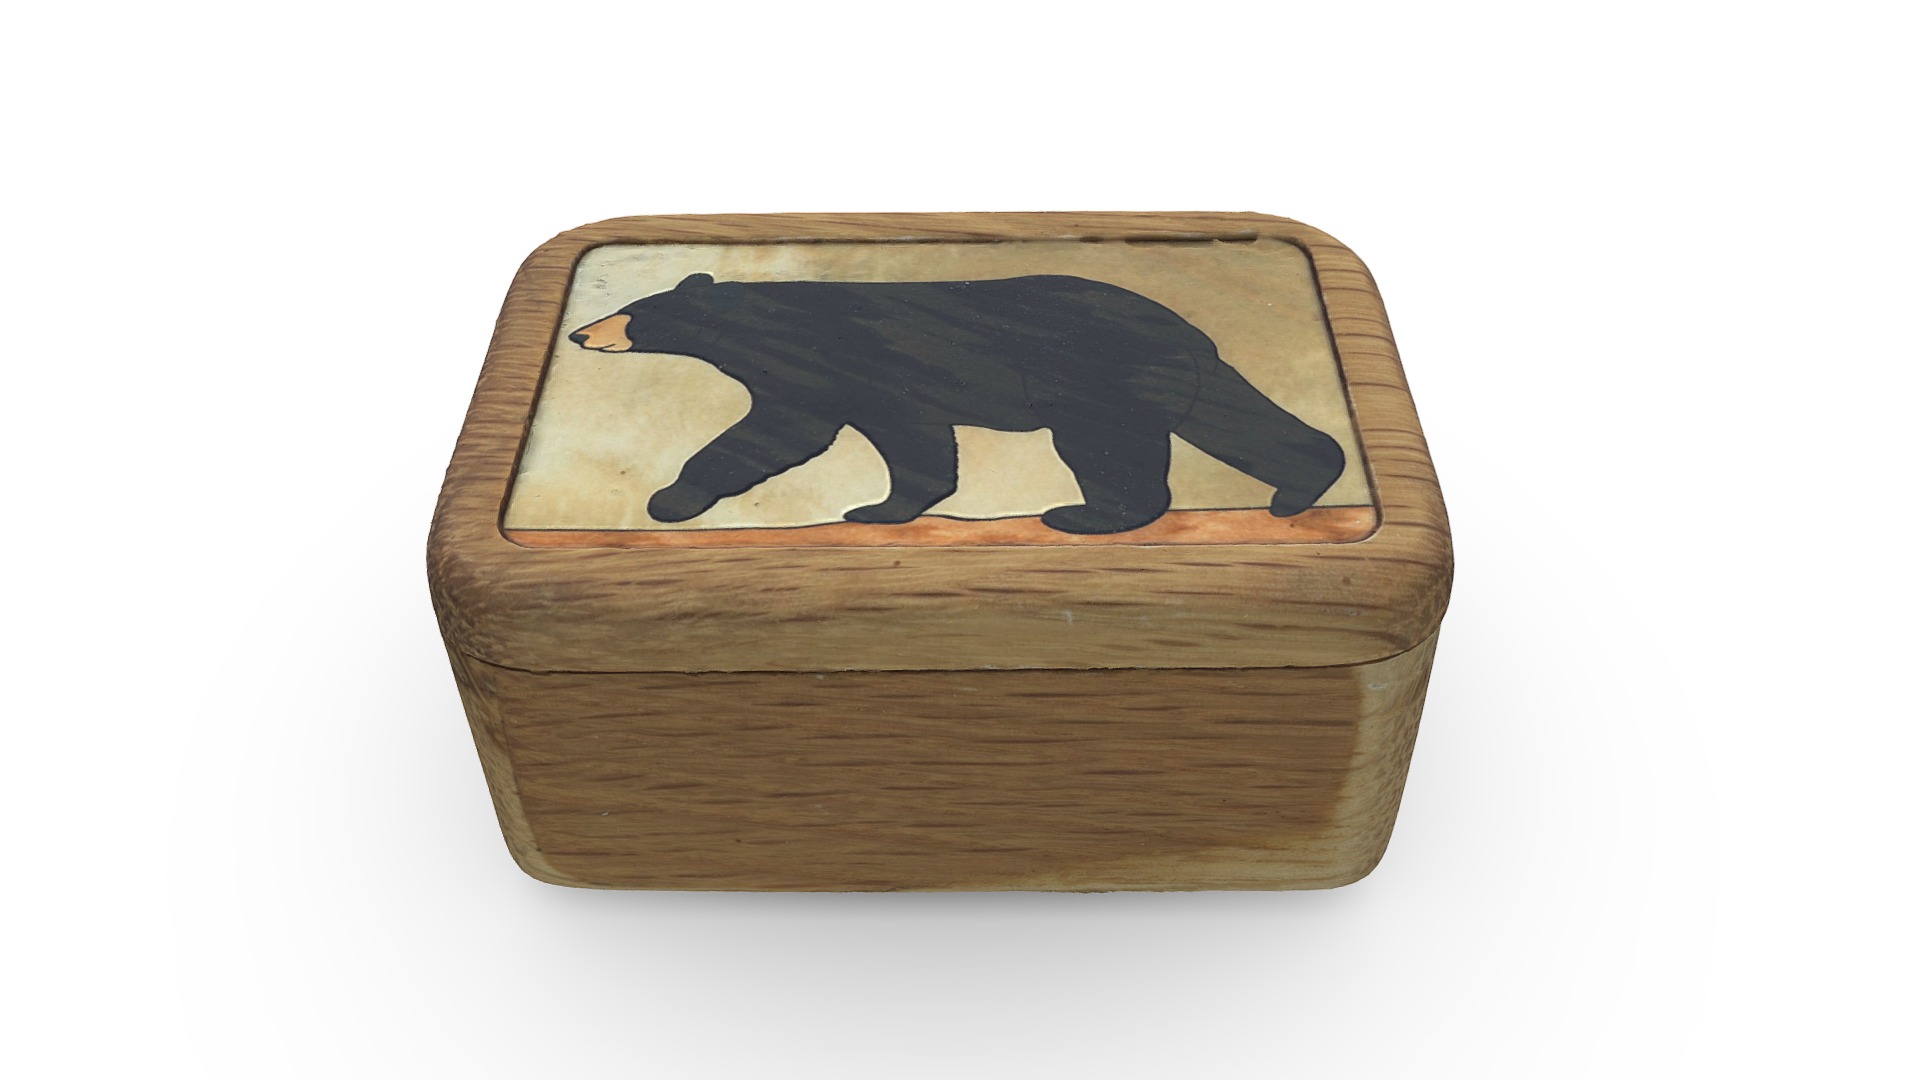 3D model Black Bear souvenir box - This is a 3D model of the Black Bear souvenir box. The 3D model is about a wooden box with a pair of pants on top.